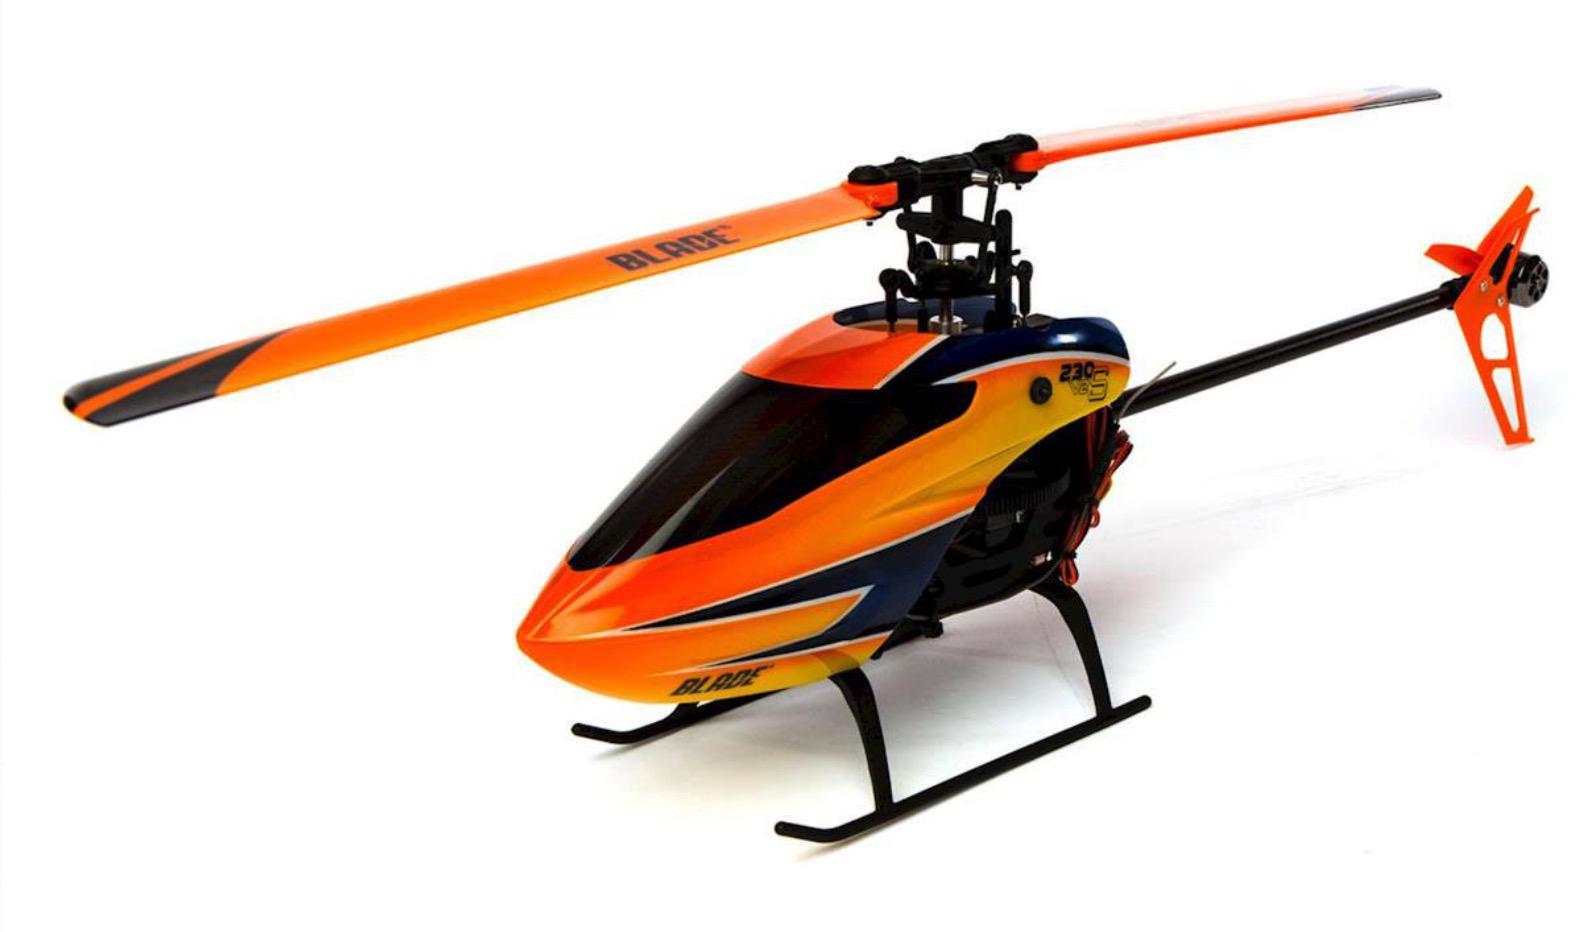 Rtf Helicopters For Beginners:  Smaller and lighter models are generally better for beginnersSelecting the Right RTF Helicopter for Beginners